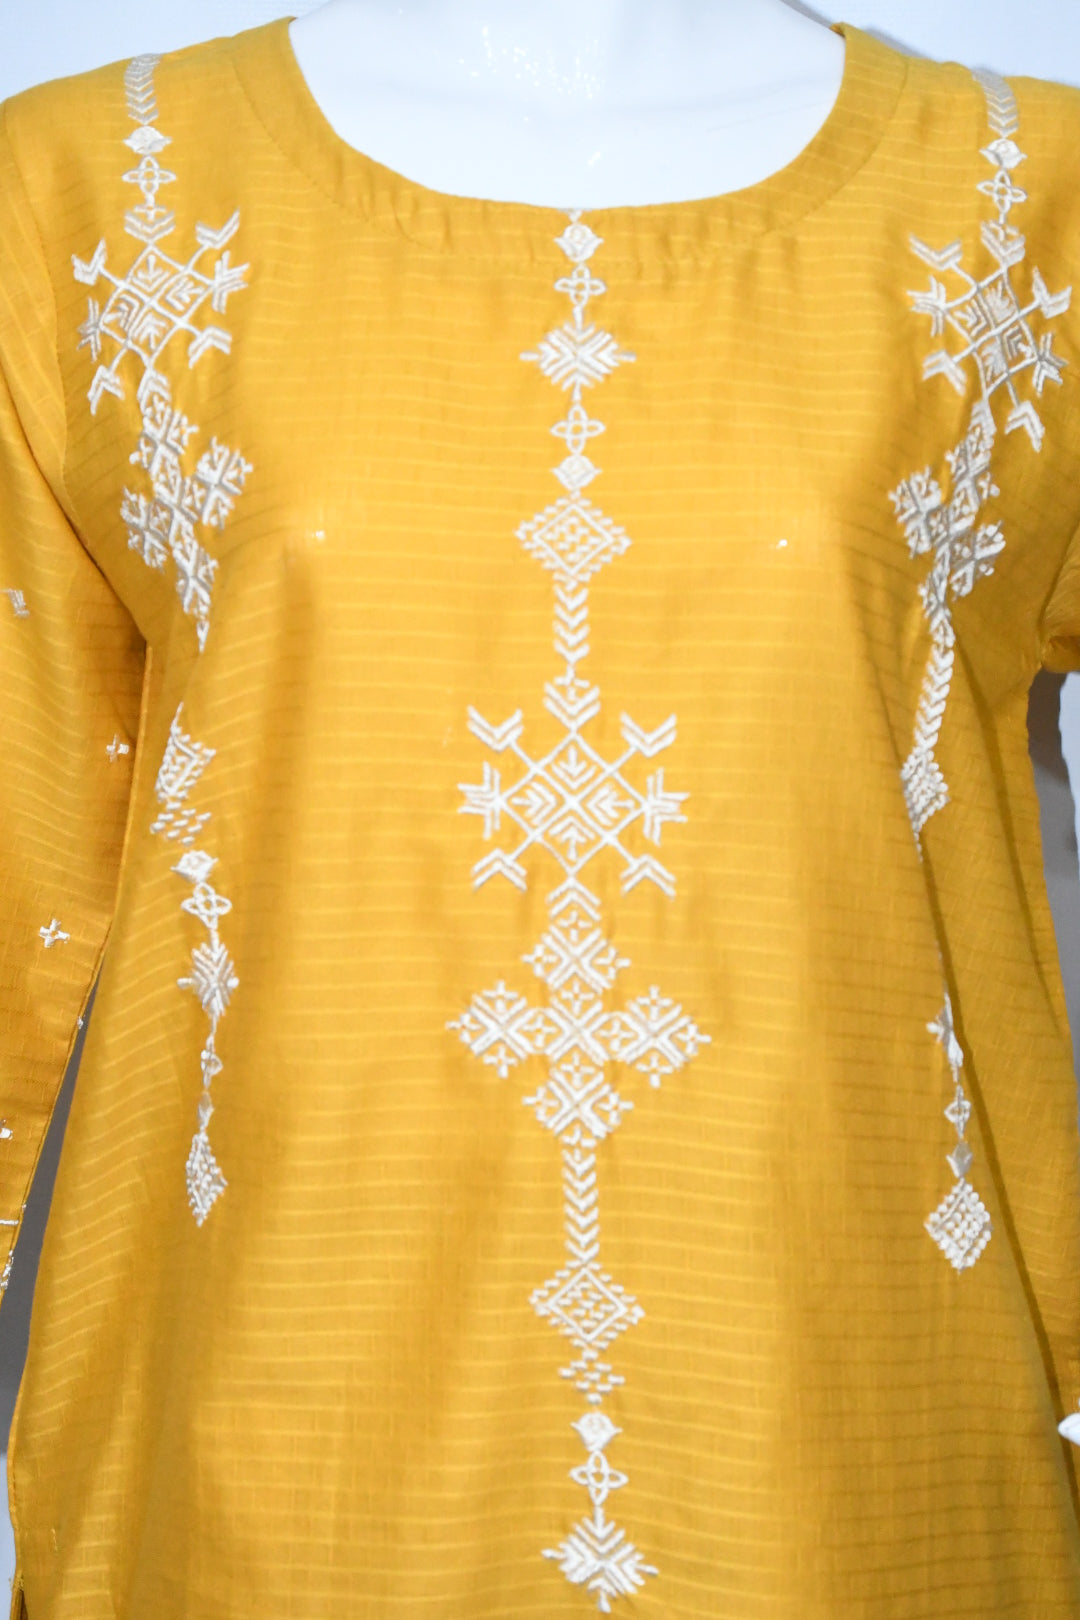 Sunflower Yellow Embroidered Shirt and Trouser